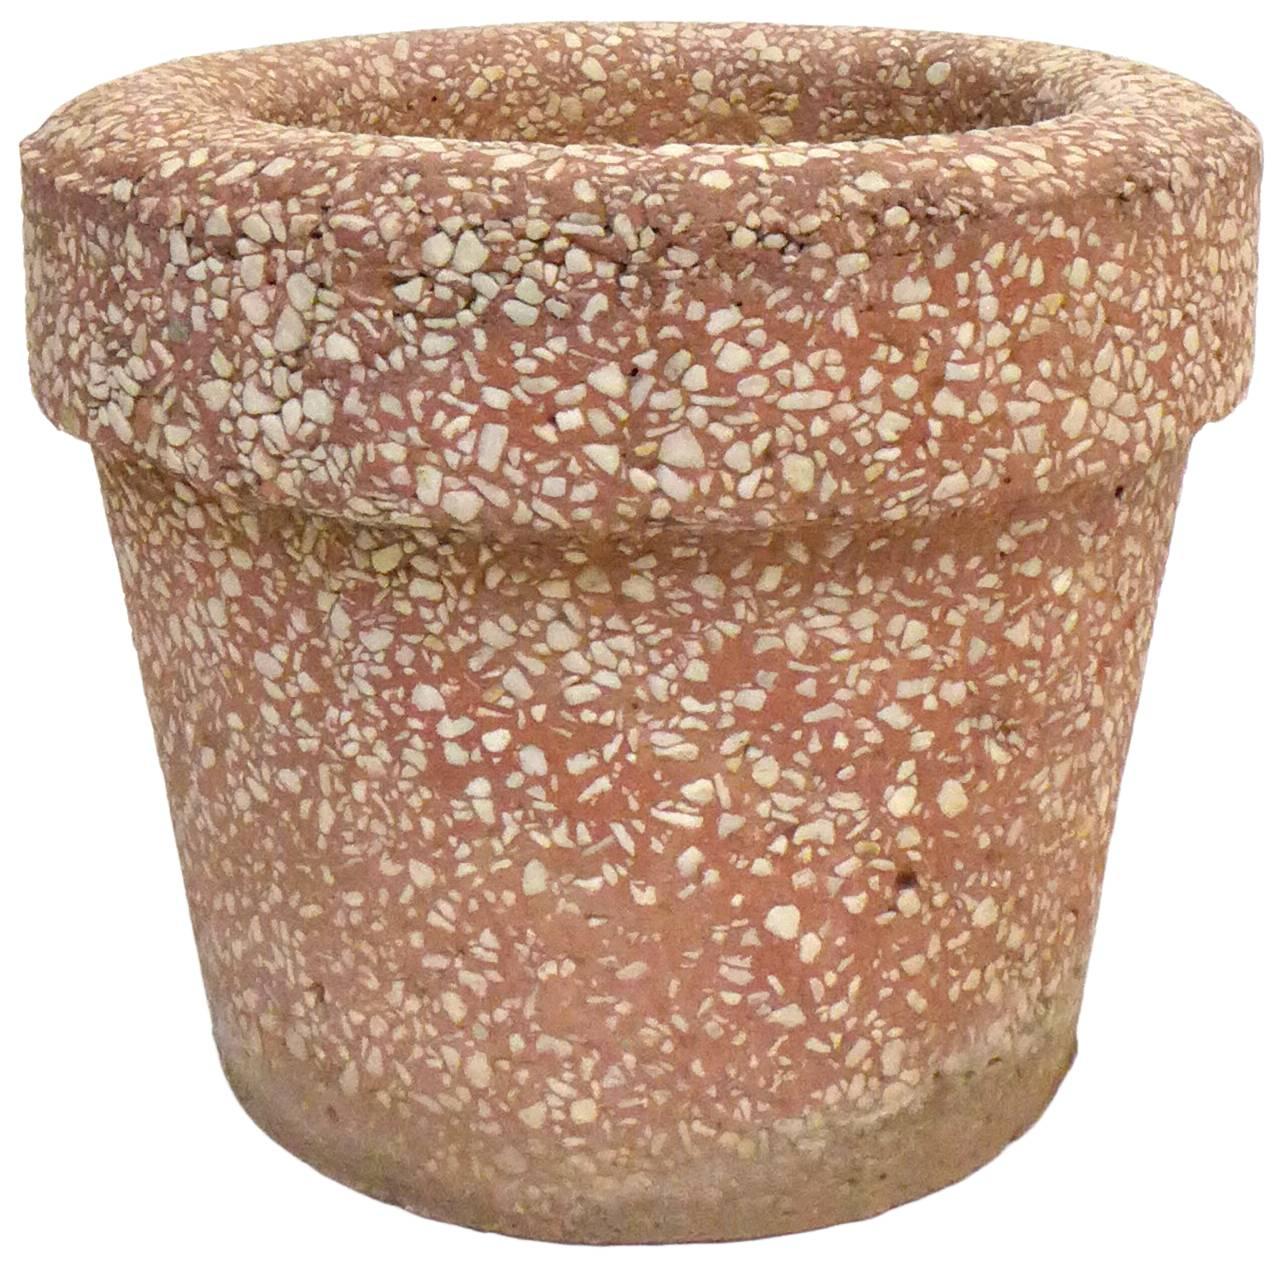 A wonderful trio of cast terrazzo planters. A classic planter form in a great, unexpected, chunky scale and material. Each planter wearing individual, much-desired patina from some life outdoors. A fantastic grouping of decorative botanical buddies,